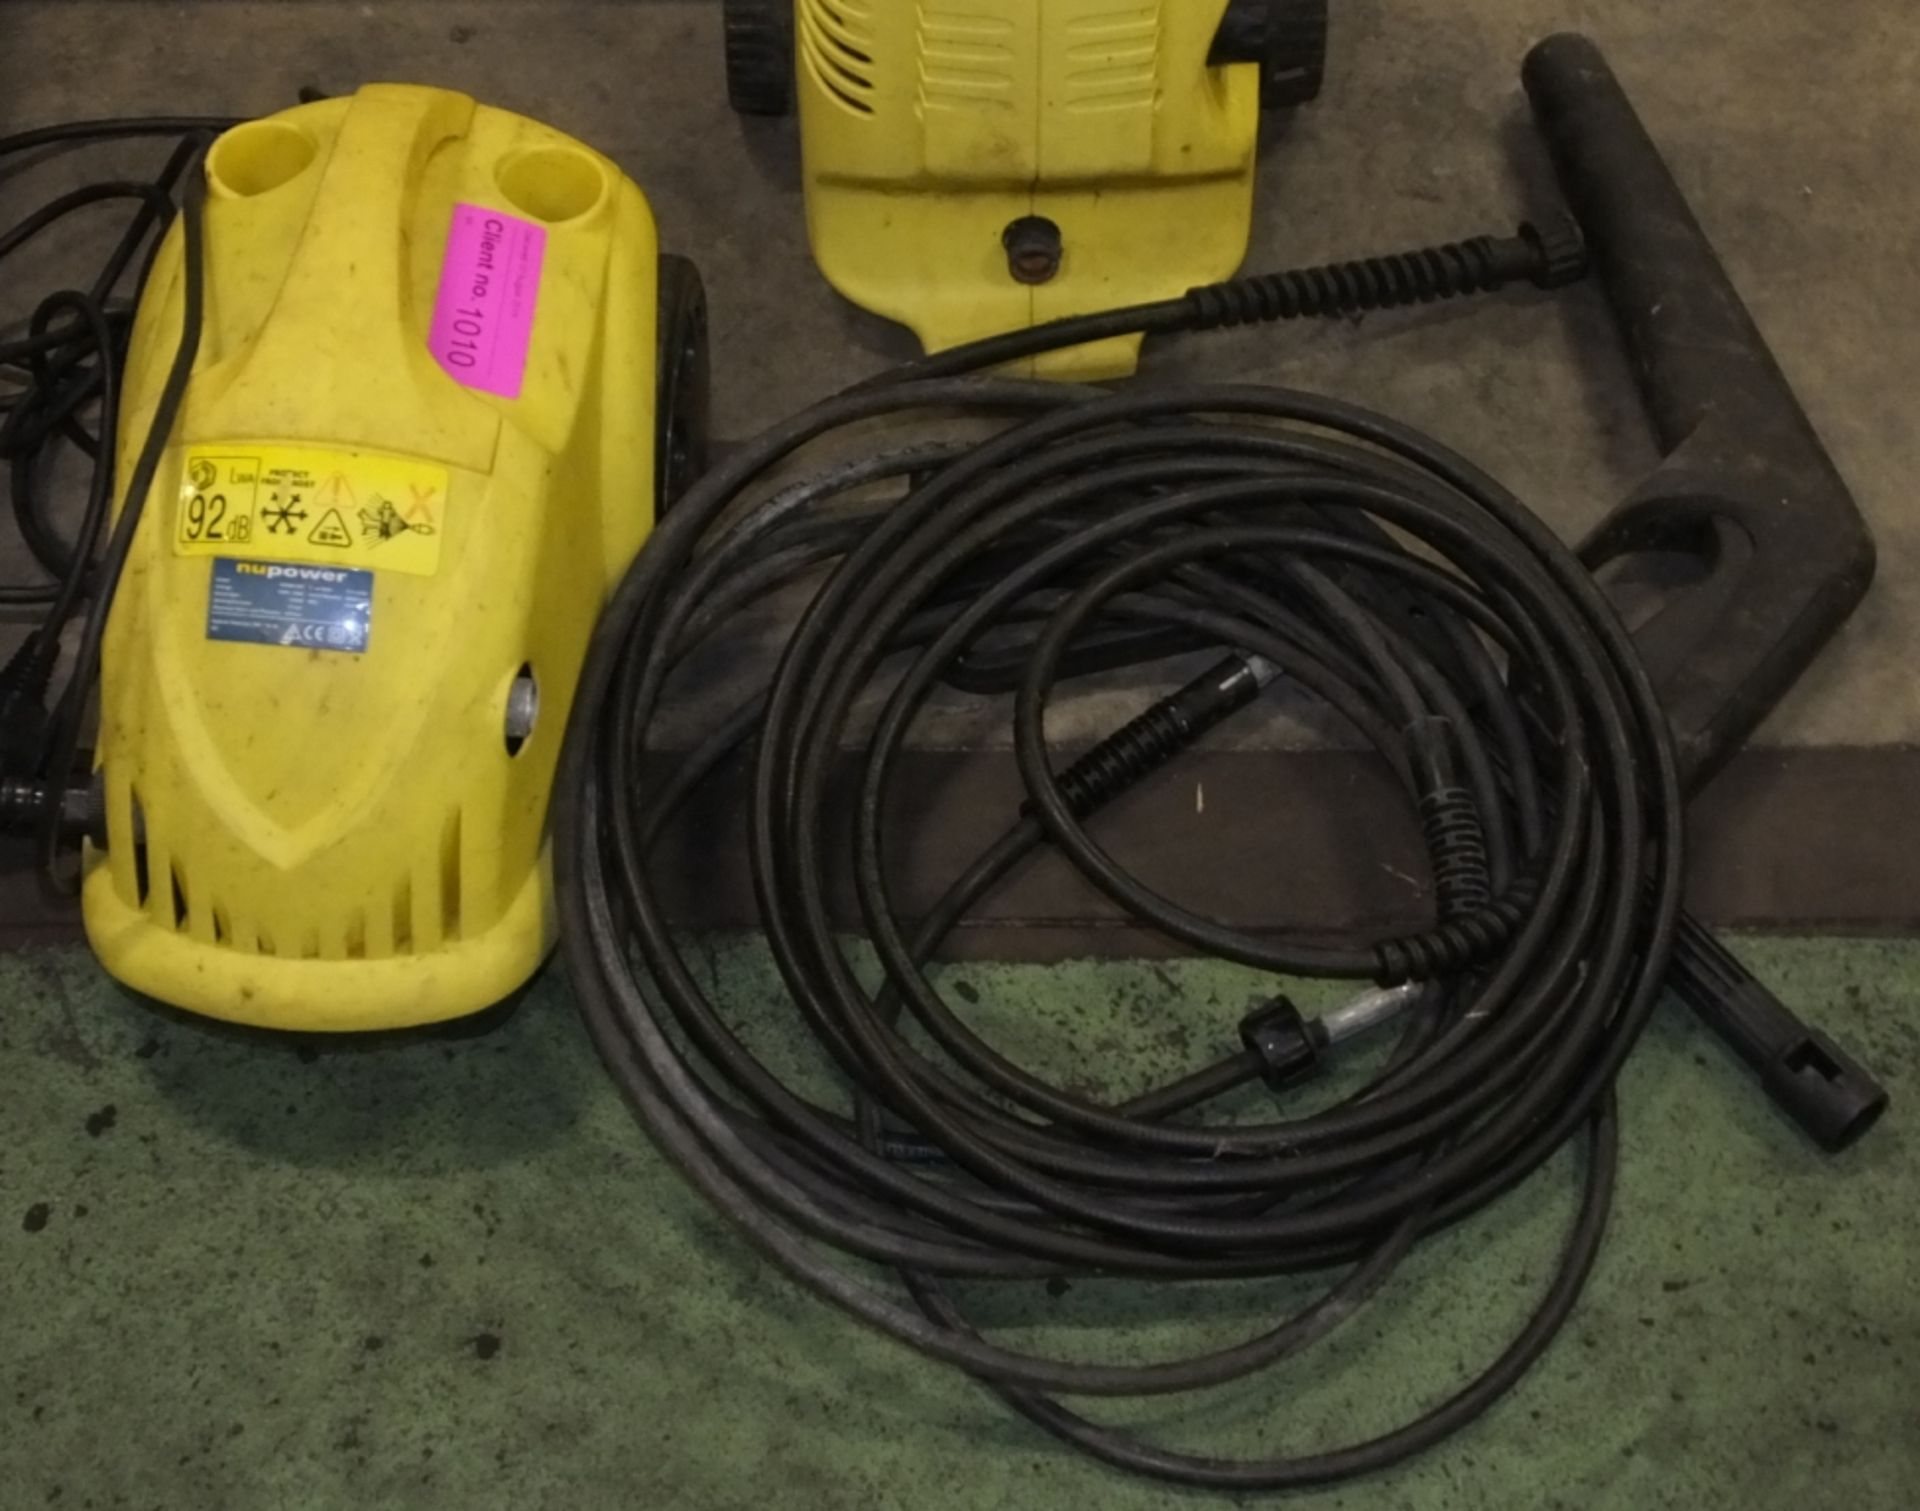 Nu Power Pressure Cleaner, Power Craft Pressure Cleaner with hoses - As Spares - Image 2 of 4